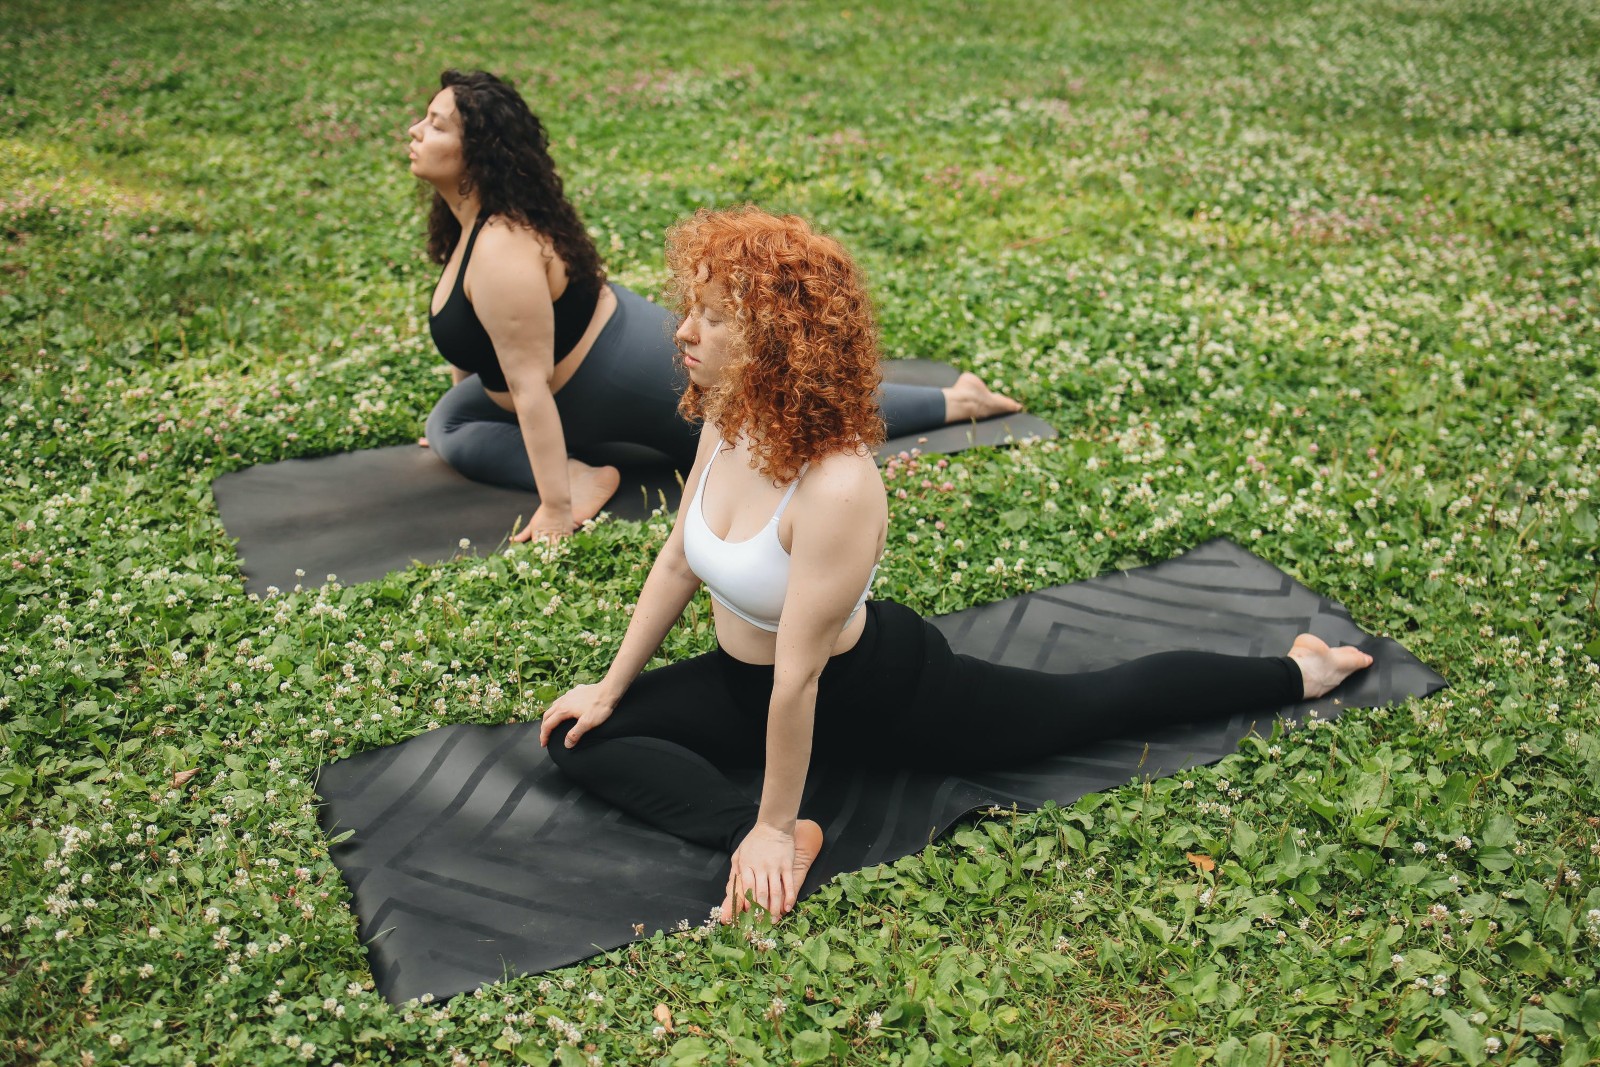 Practice yoga for a glow-up